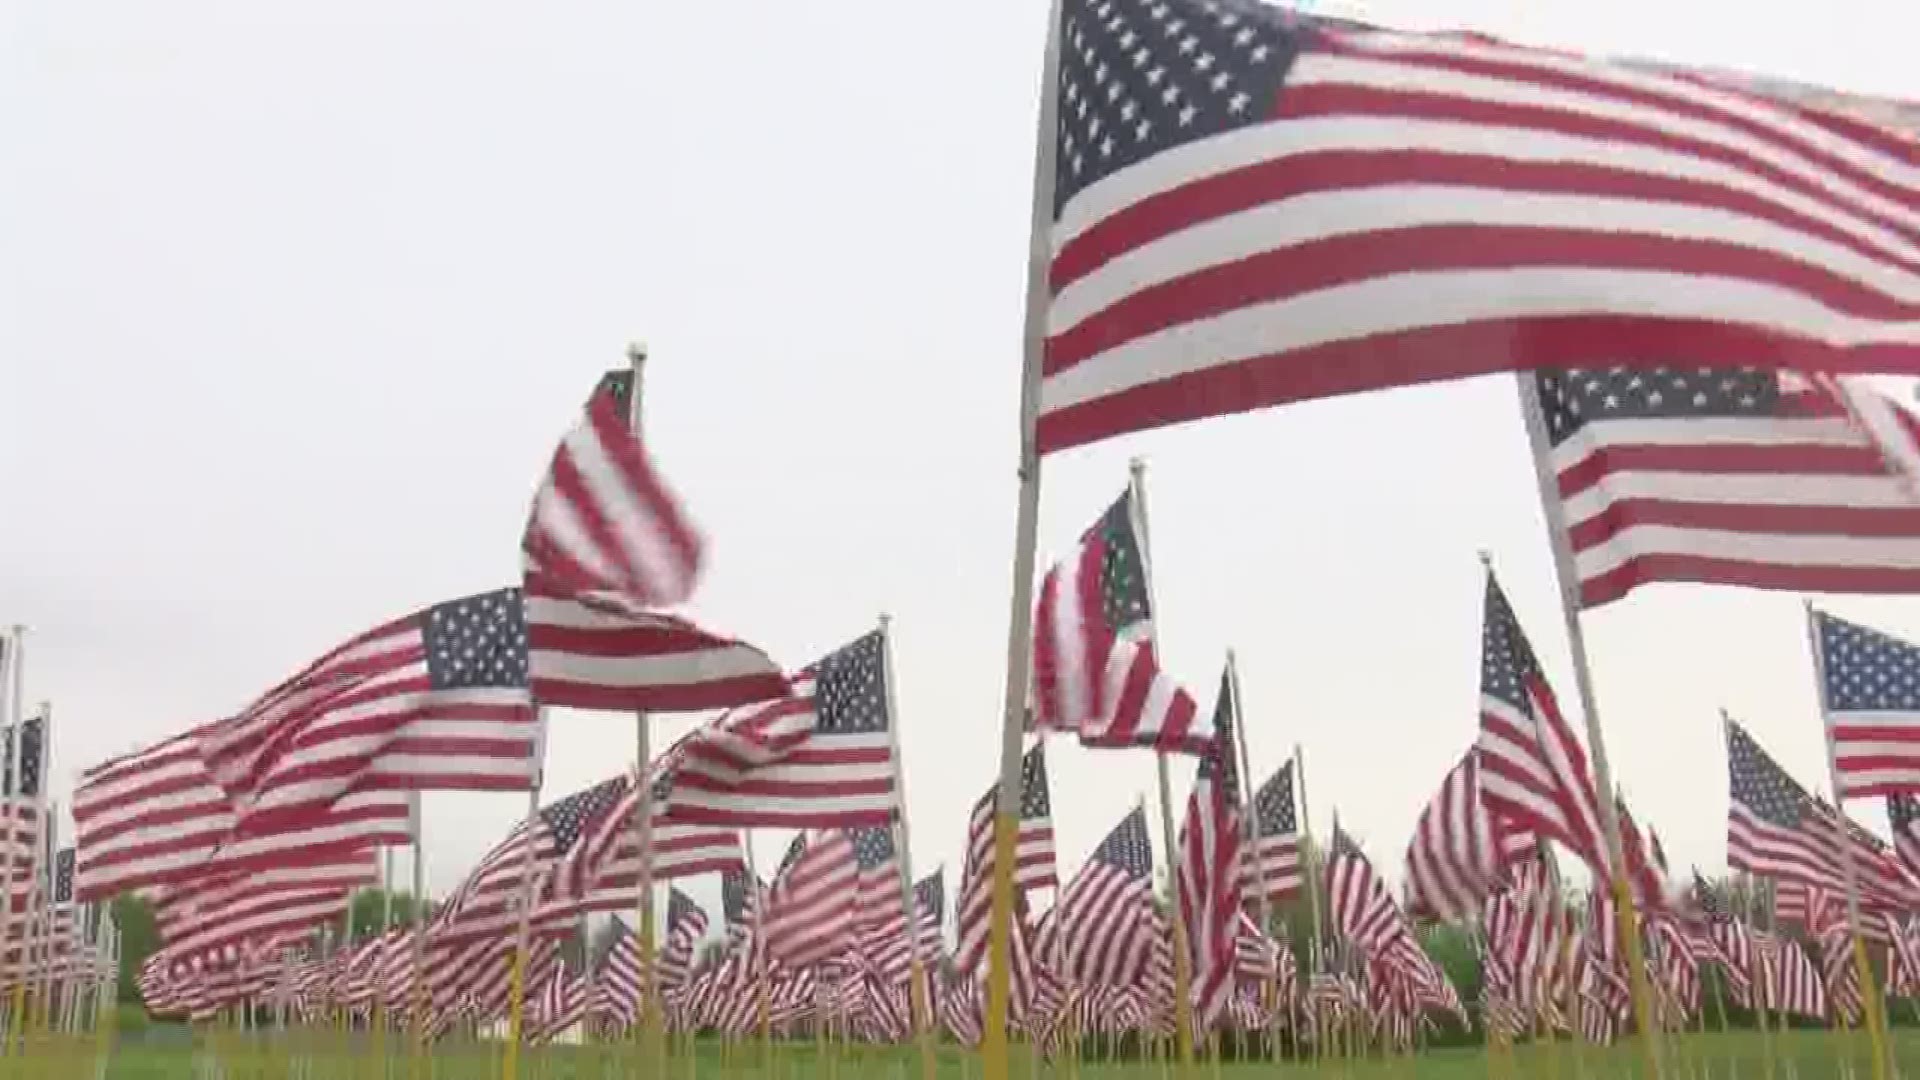 The Ohio Flags of Honor Memorial is making a stop here, one of 16 this year around the state.